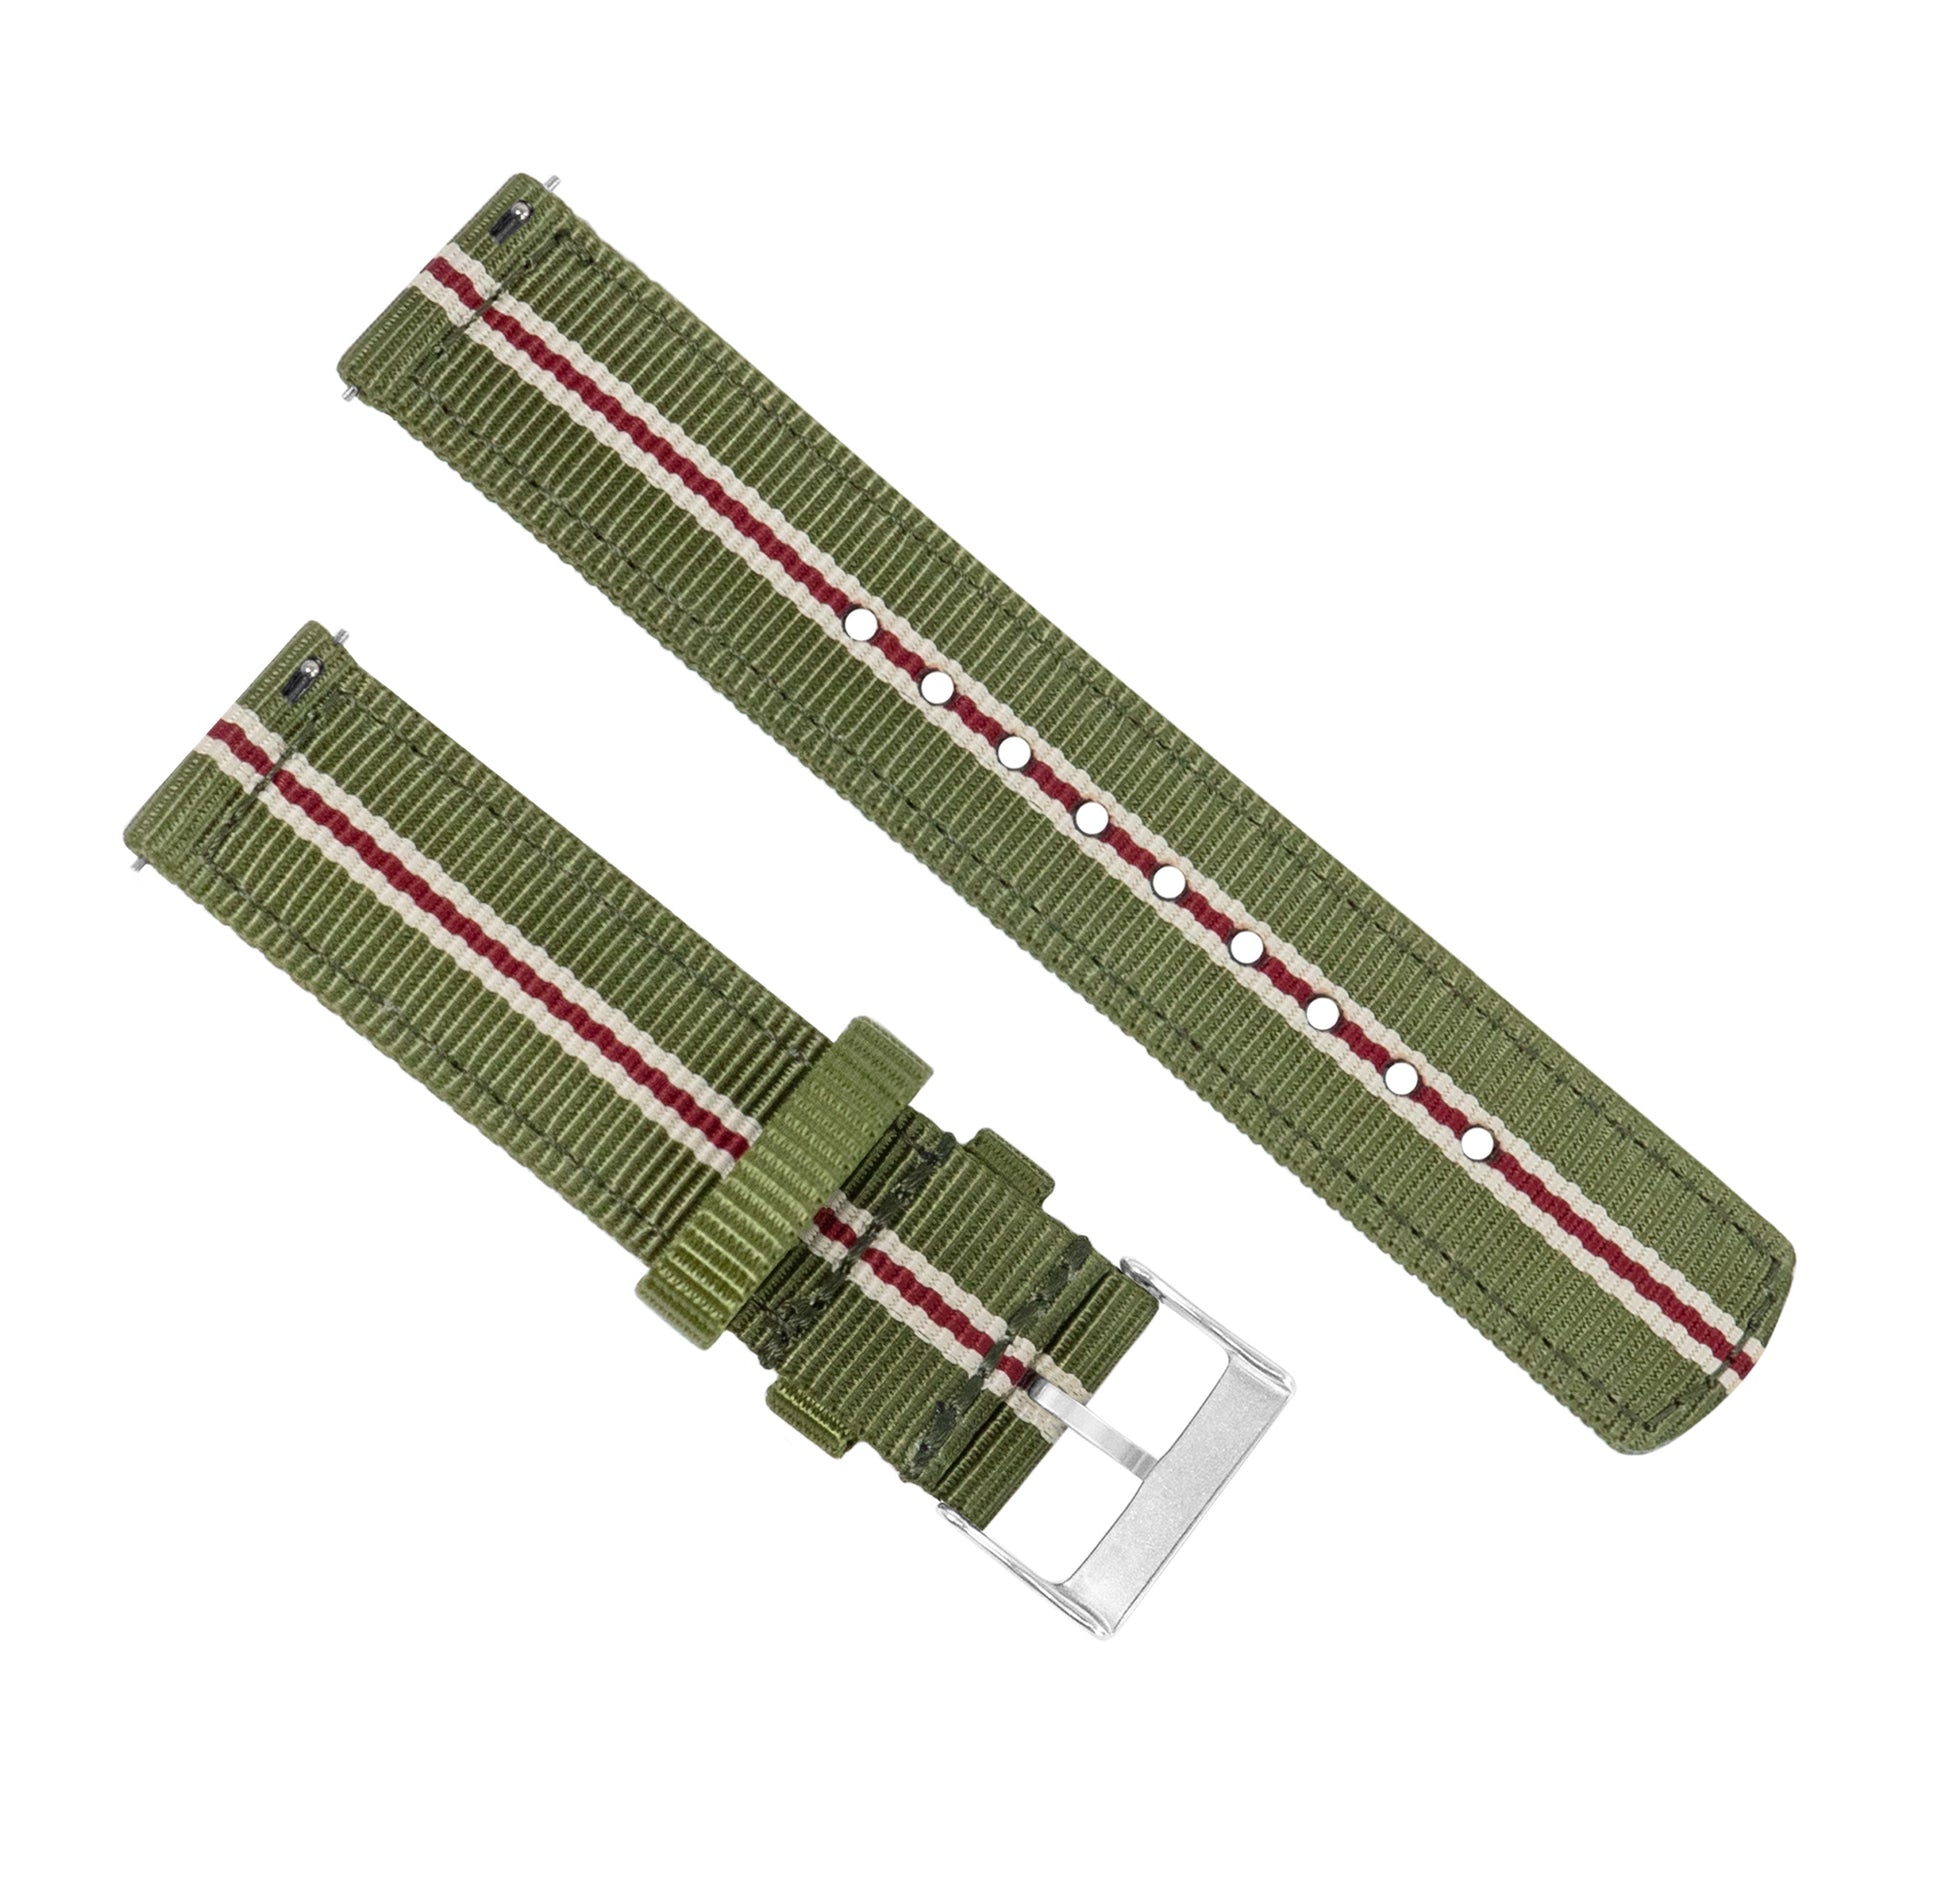 Withings Nokia Activité and Steel HR | Two-Piece NATO Style | Army Green & Crimson - Barton Watch Bands